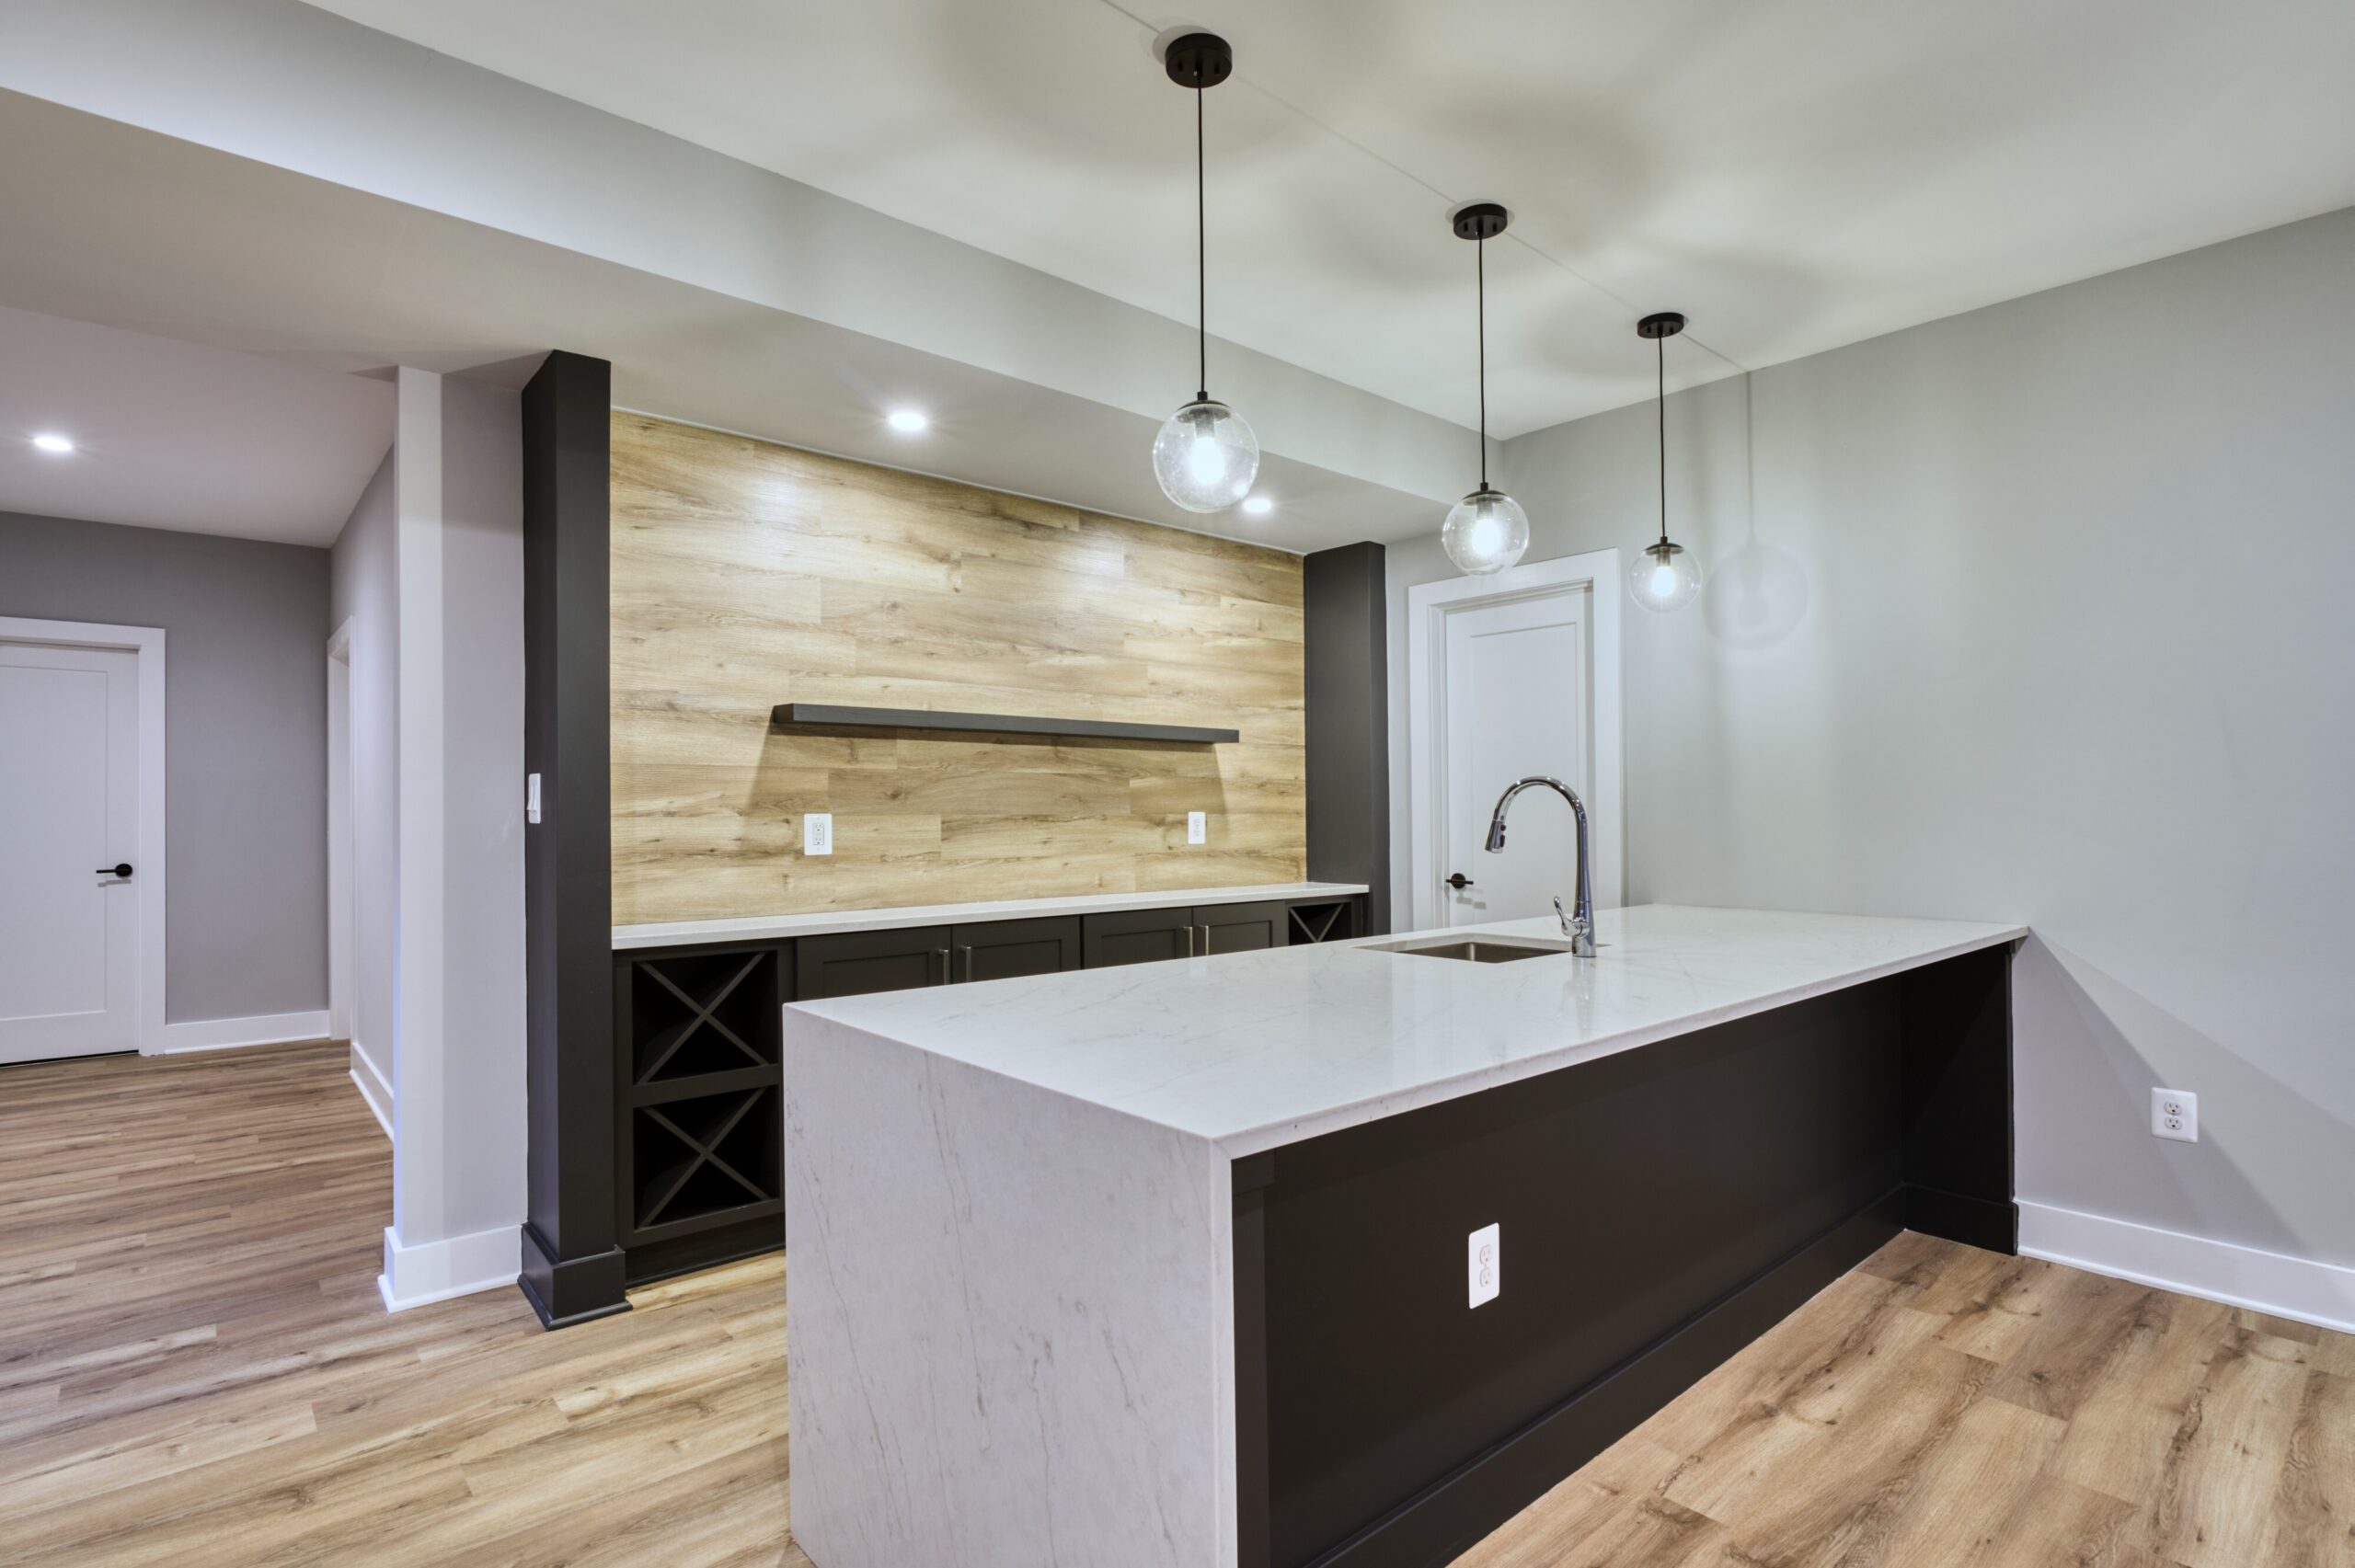 Professional interior photo of new construction home at 3400 N Ohio St - showing the basement bar with large island, sink, wine rack and bottle dislplay